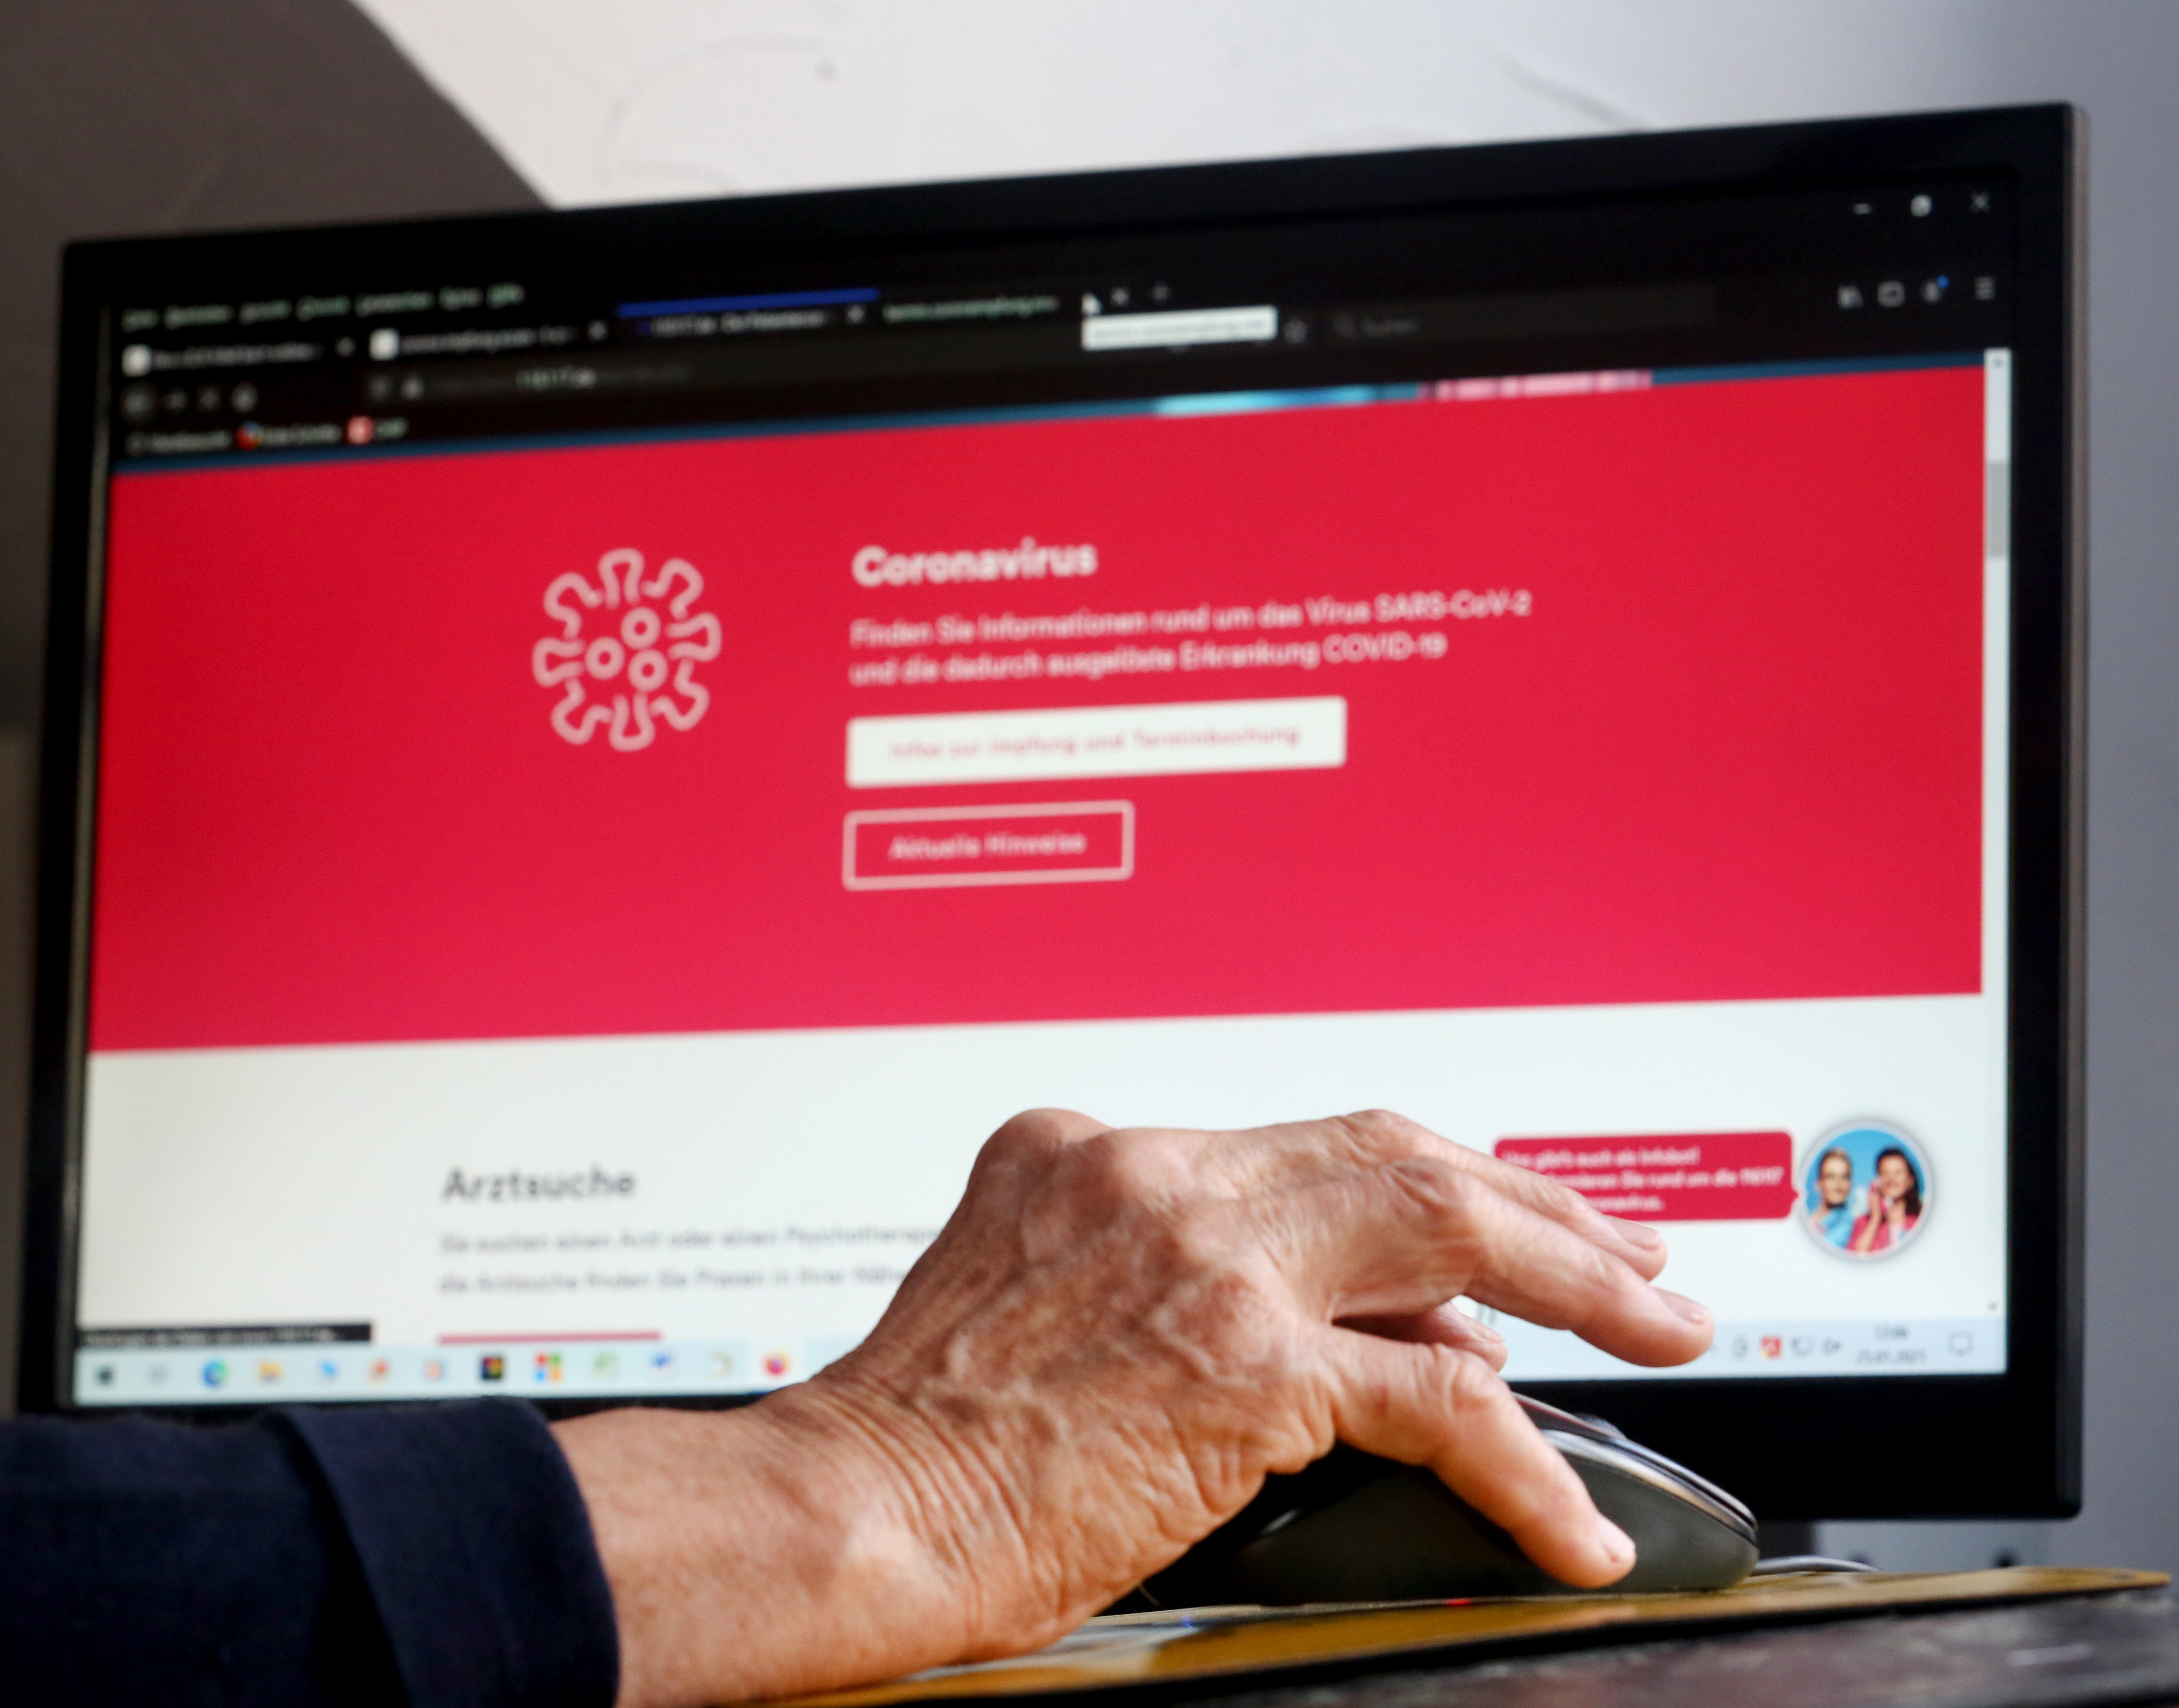 A retiree’s hand on a mouse, in front of a desktop screen showing a website about coronavirus vaccination appointments.